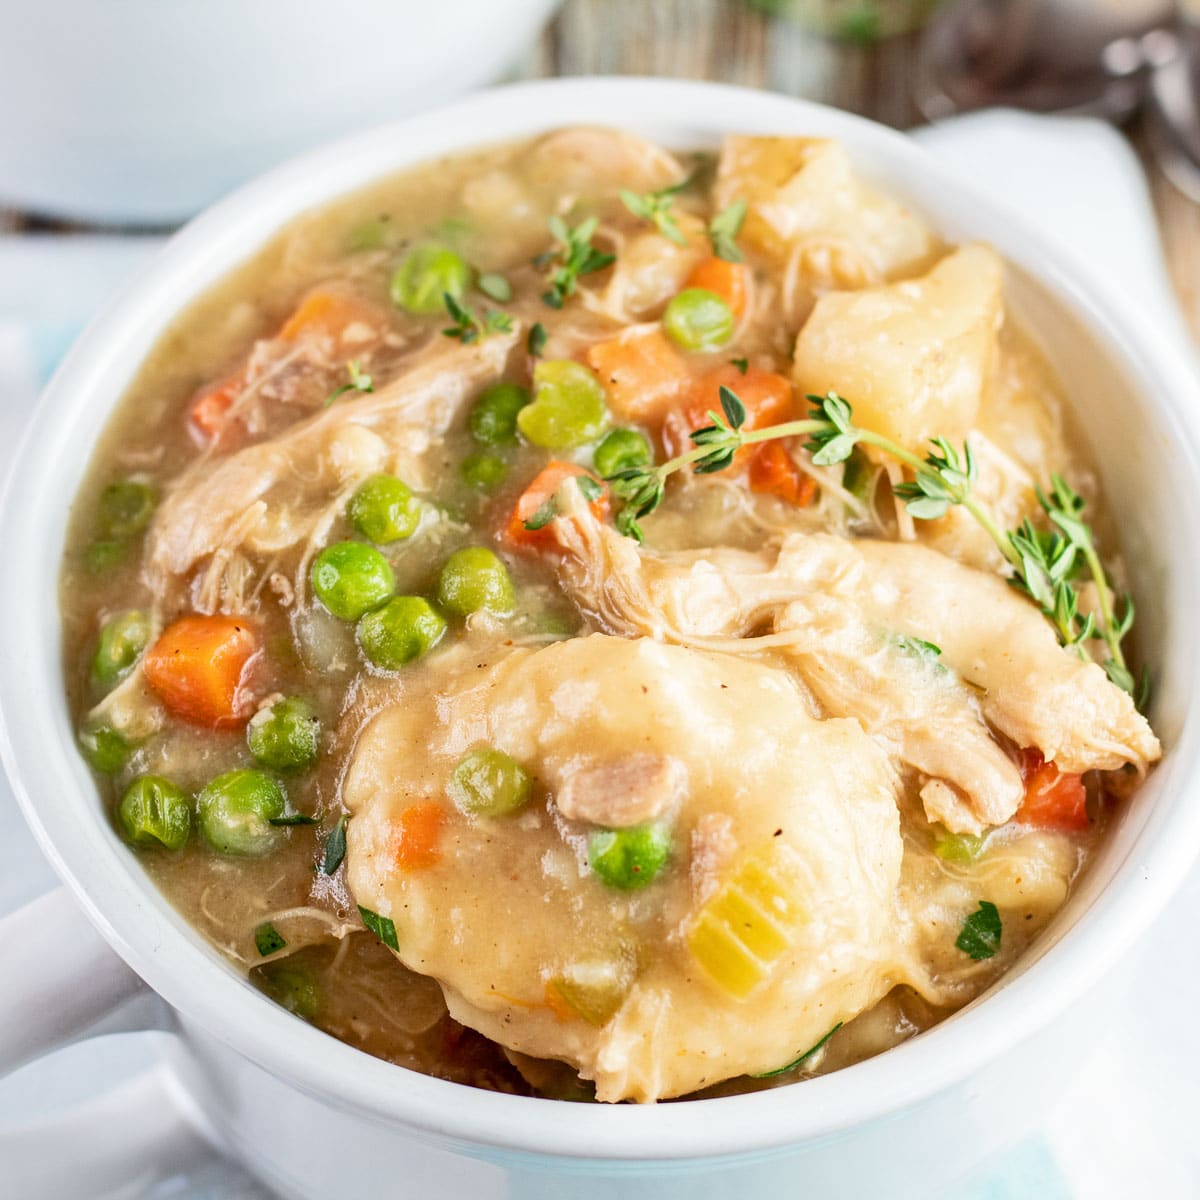 Hearty Bisquick chicken and dumplings served in white soup bowl.